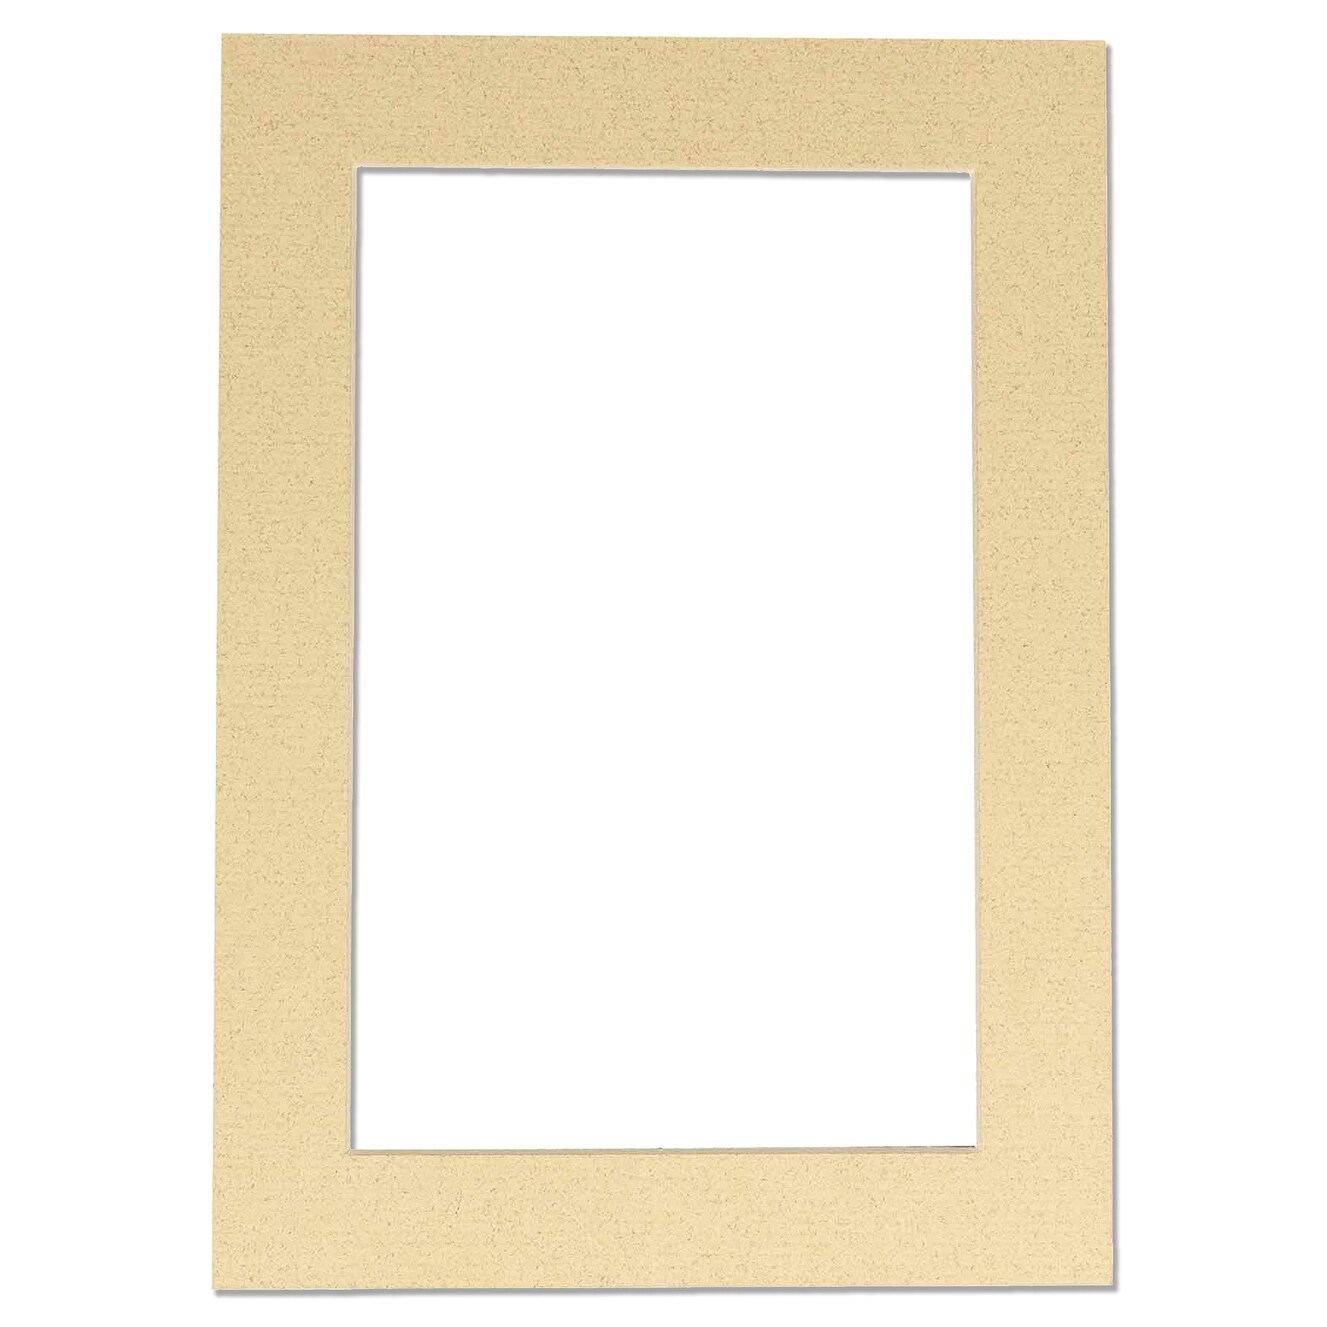 13x19 Mat for 18x24 Frame - Precut Mat Board Acid-Free Textured Cream 13x19 Photo Matte for A 18x24 Picture Frame, Premium Matboard for Family Photos